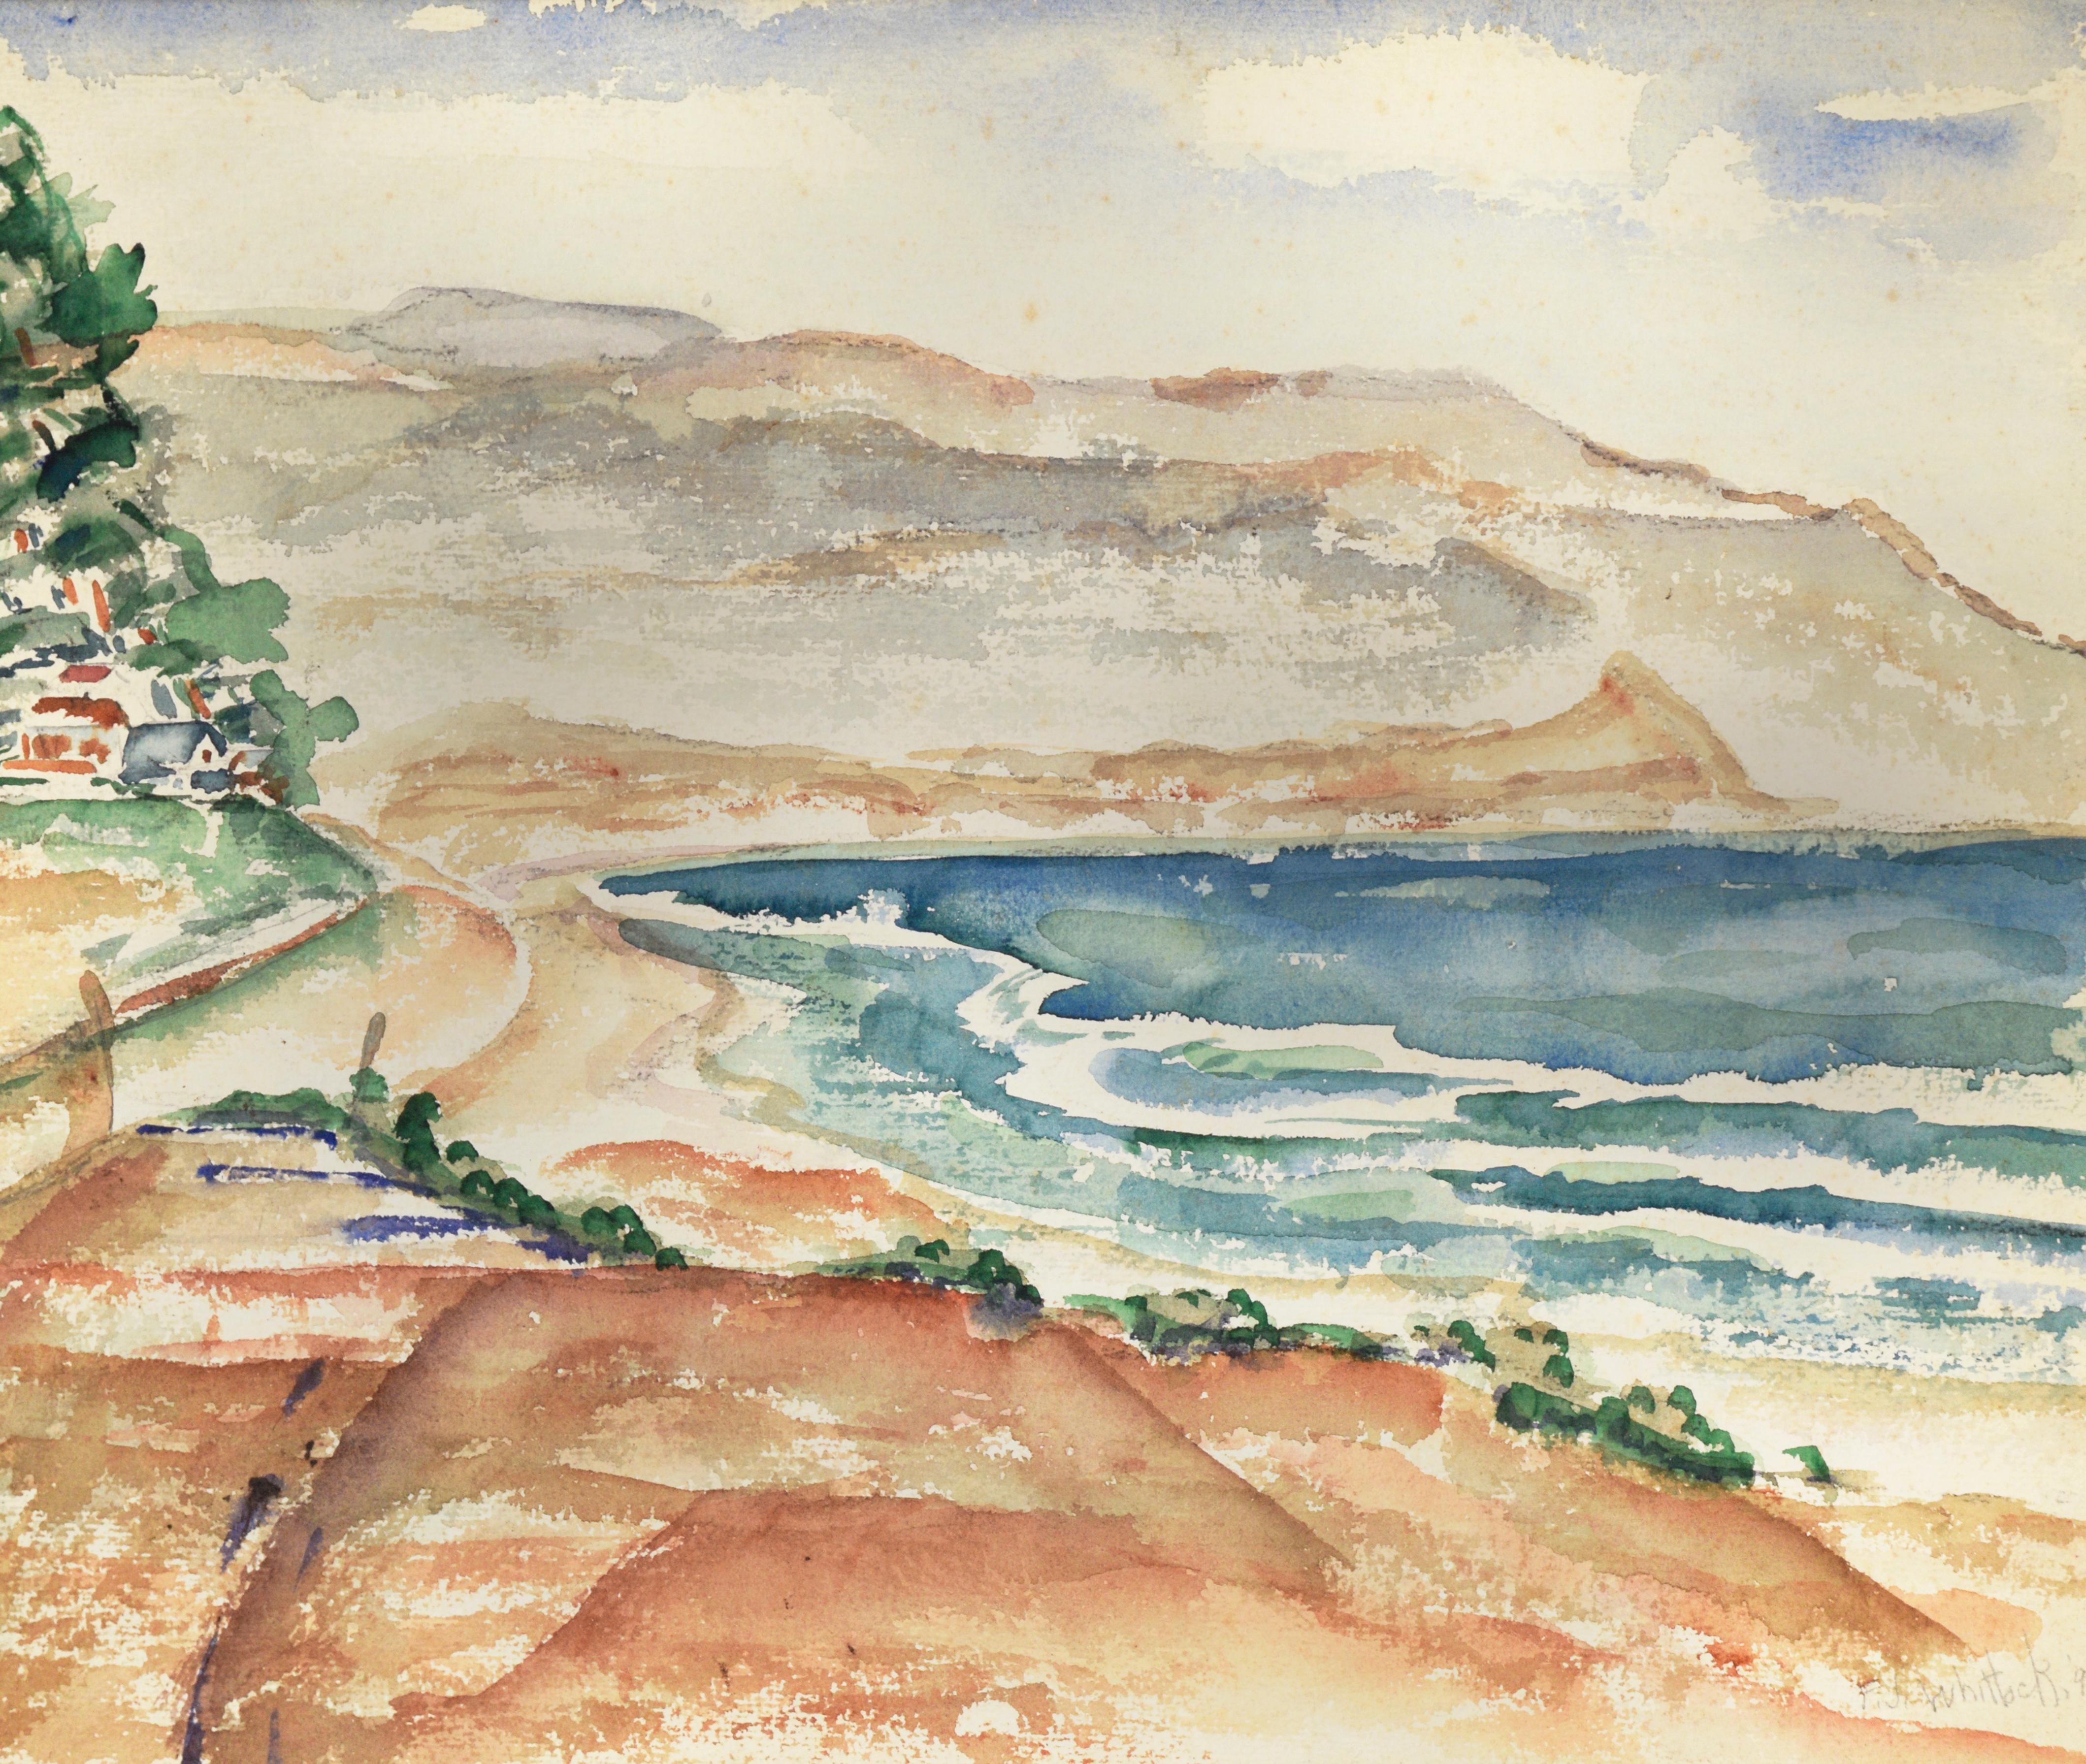 Hermosa Beach Coastline - Watercolor On Paper - Painting by FJ Whitlock